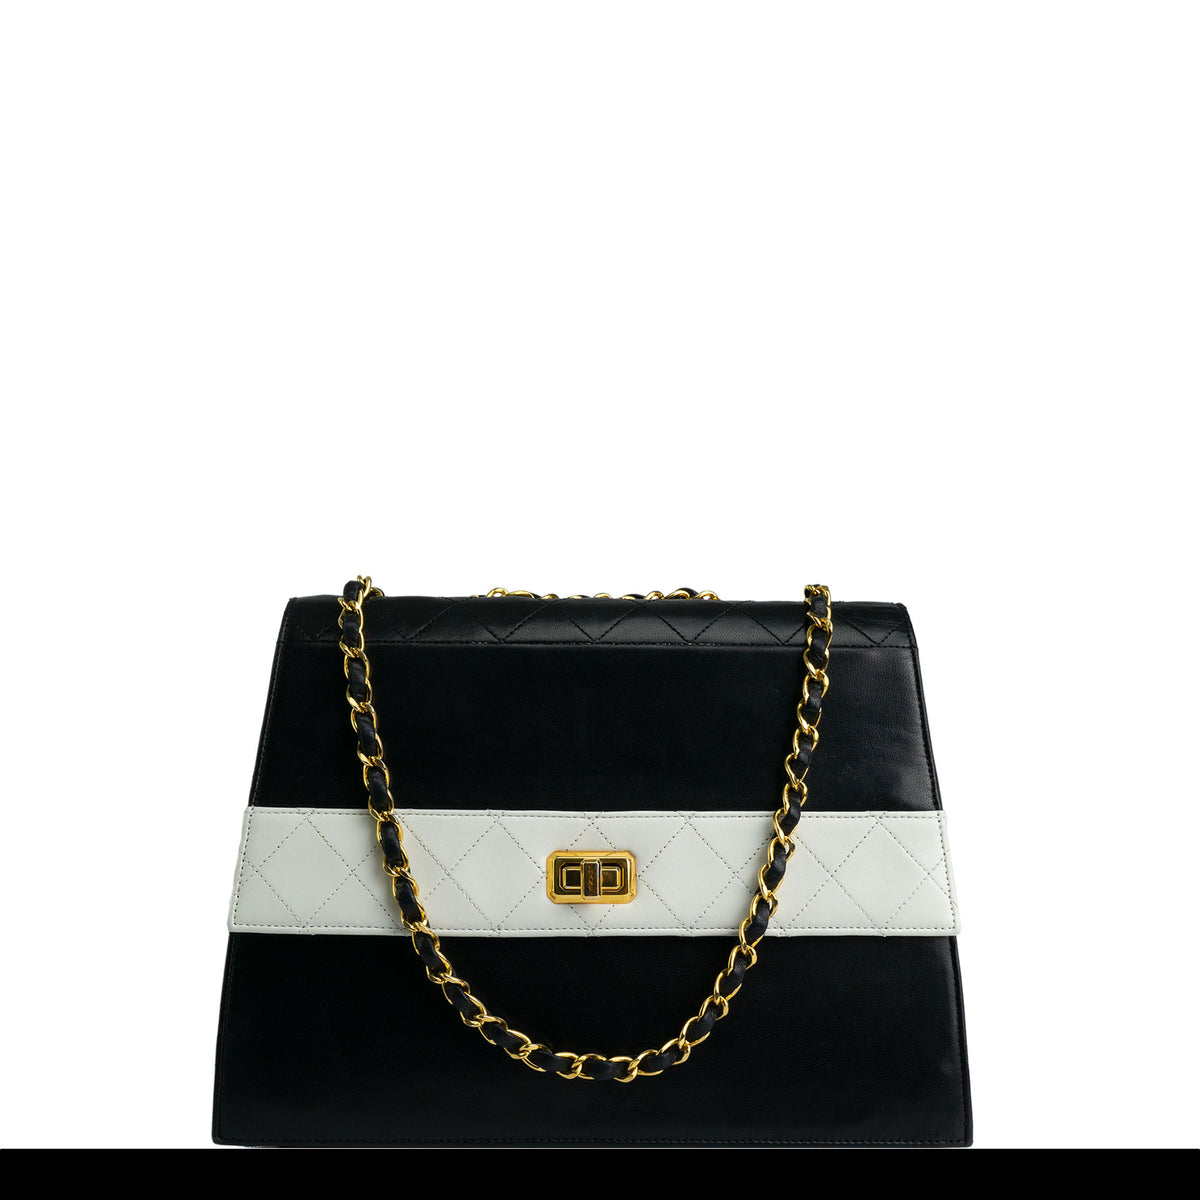 Chanel Two Tone Black and White Vintage Flap Bag – House of Carver